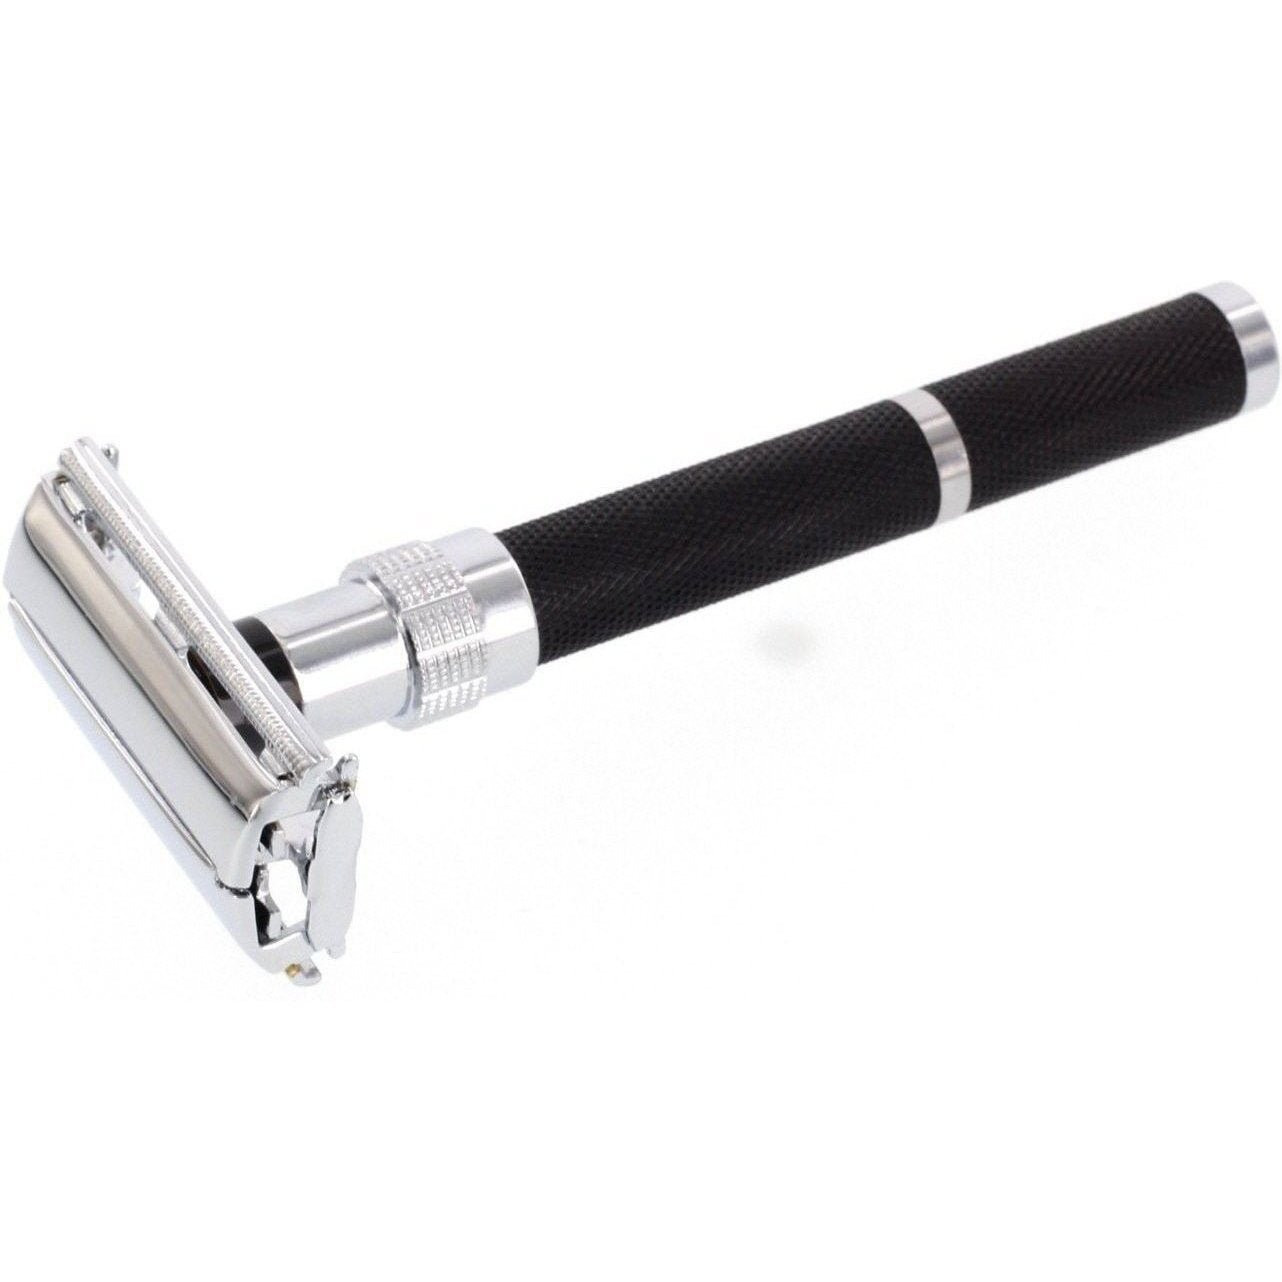 Product image 2 for Parker 96R Double Edge Safety Razor